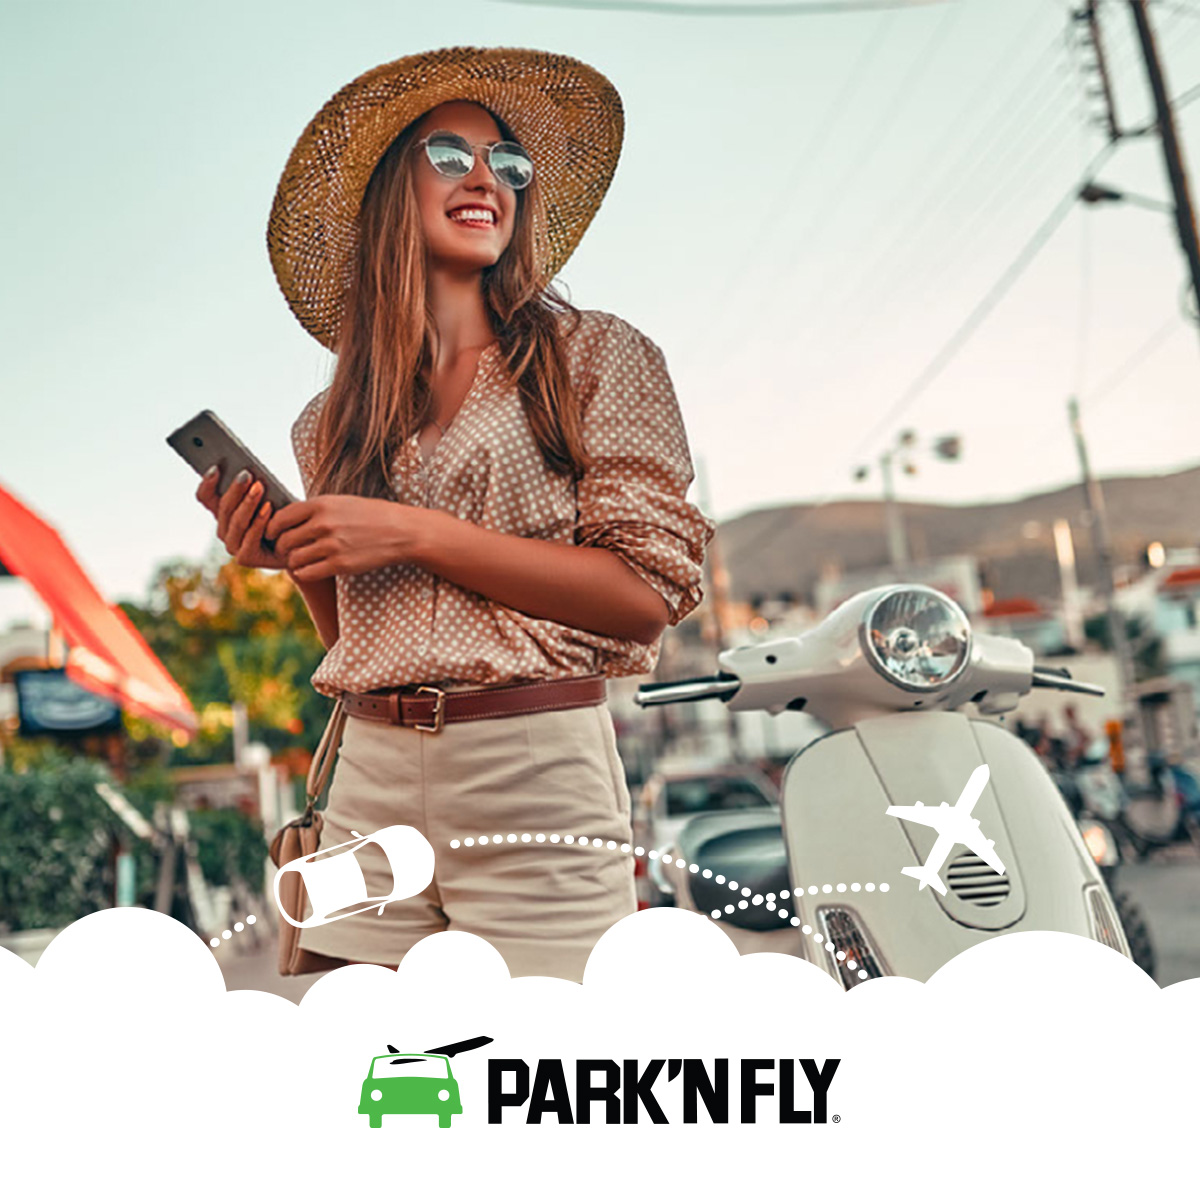 Finalizing plans for the May long weekend?
Don't forget to book your parking stay early!  Avoid disappointment as our lots fill up quickly.  Then relax and enjoy the first long weekend of the summer. 😎 brnw.ch/21wJLEz